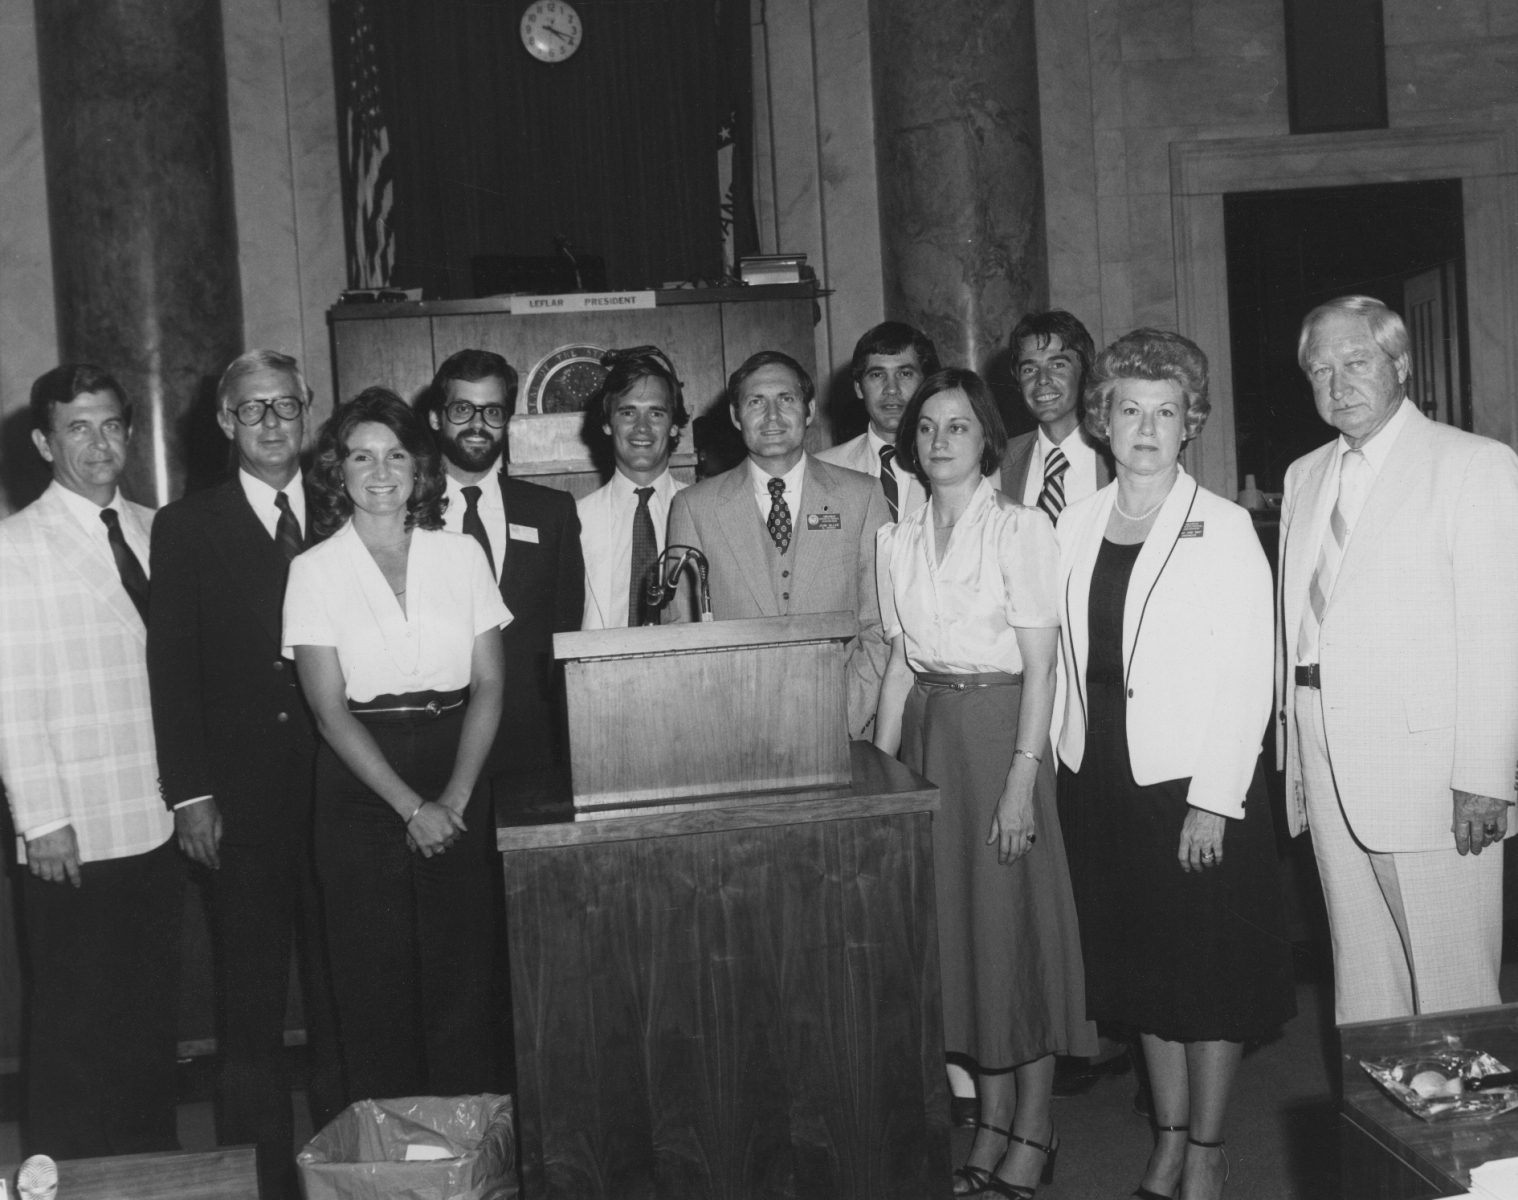 Group photograph of staff at the 1979 Constitutional Convention. Identified people include reading clerk Bill Jones, delegate John Giller, and delegate Sarah Jane Bost